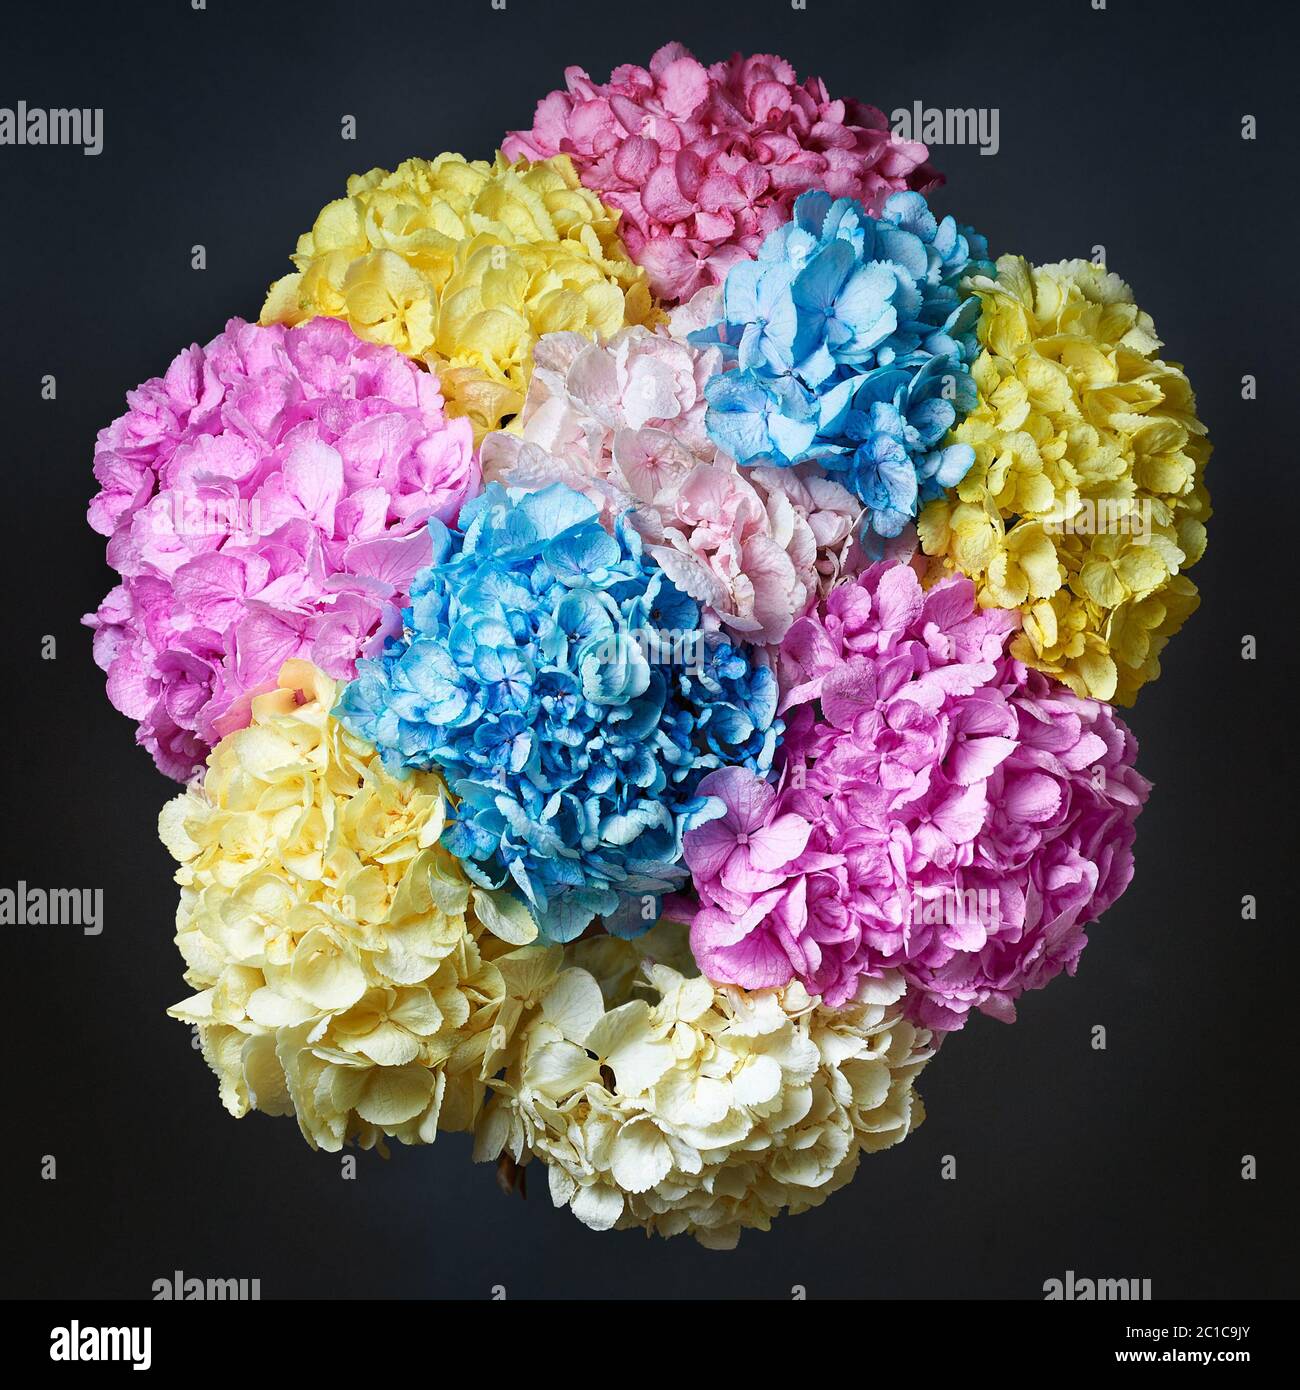 Bouquet of colored flowers peonies on a black background. Stock Photo